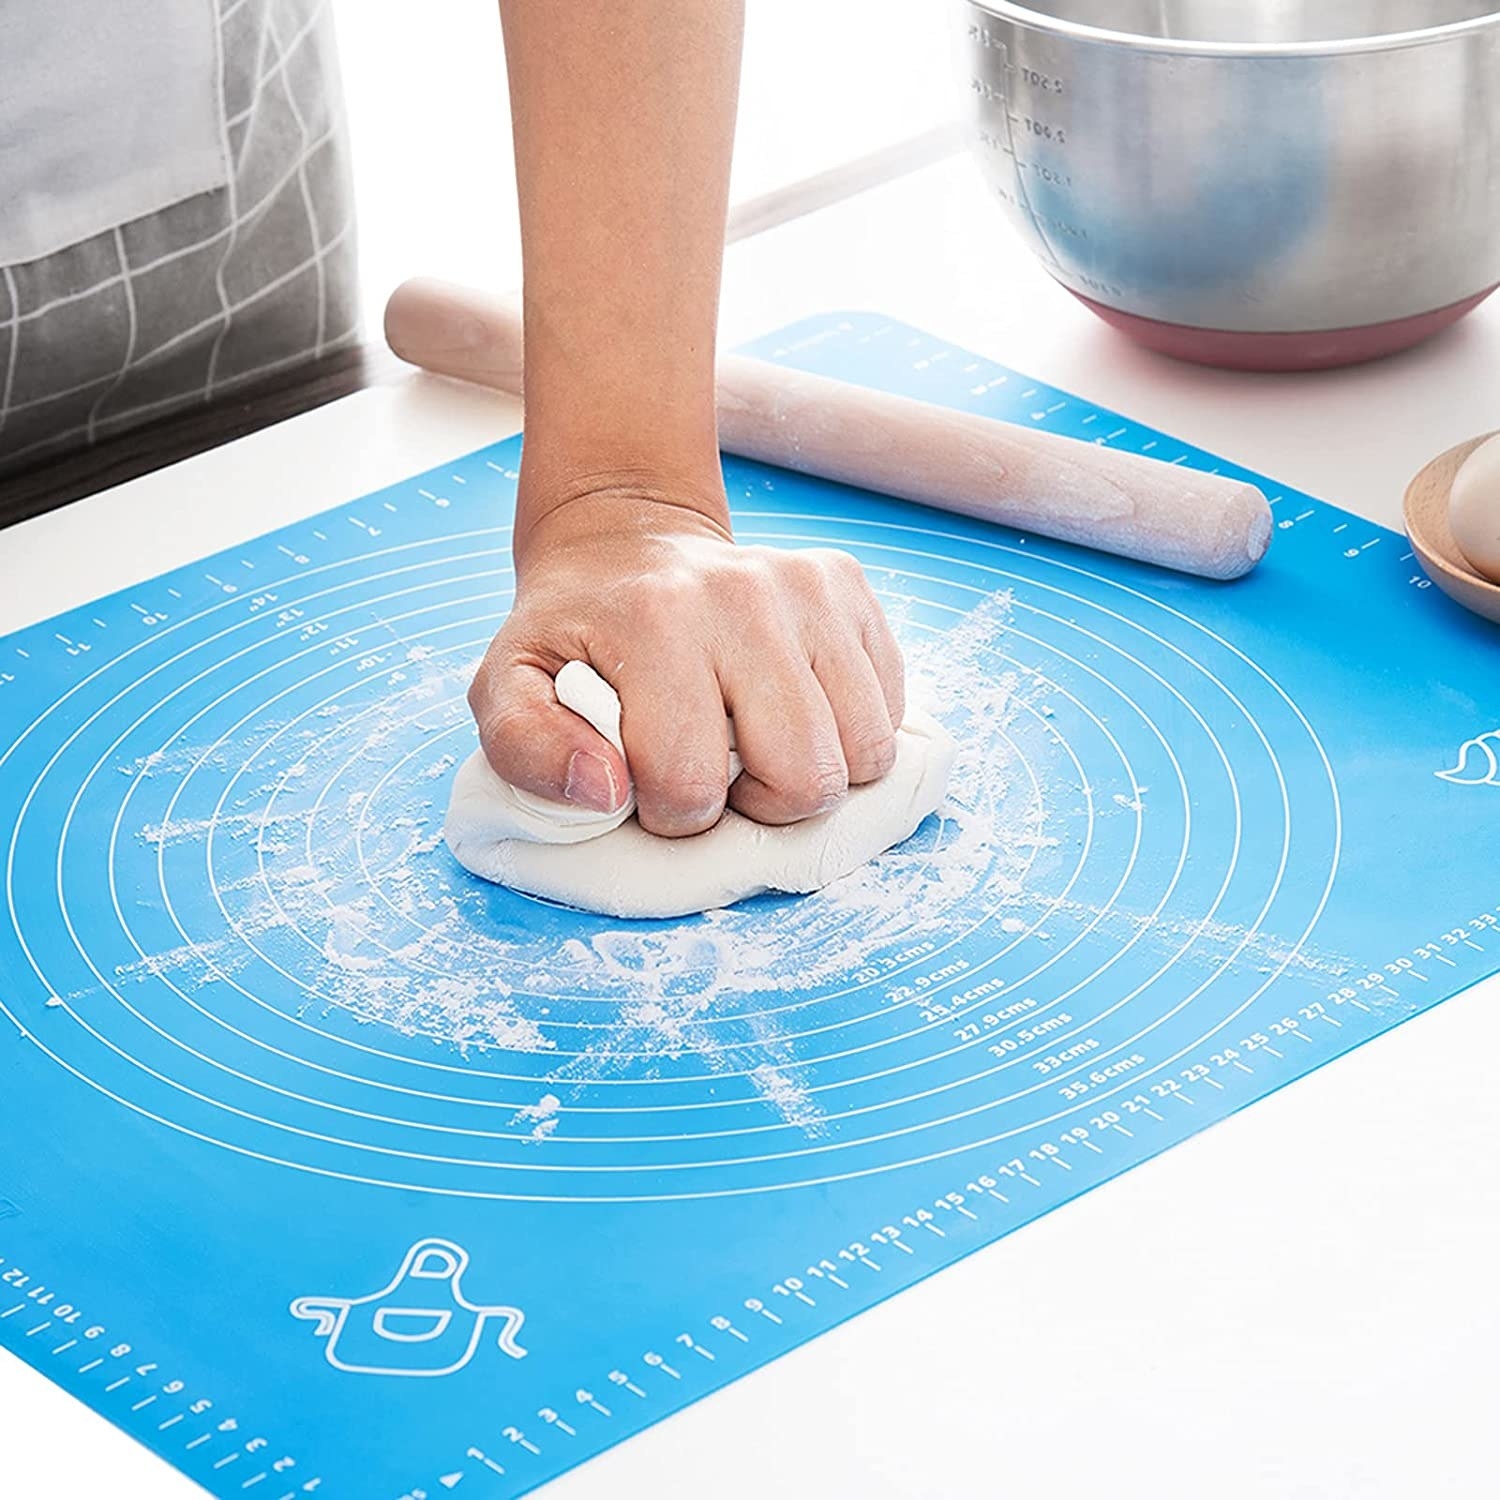 a person kneading a ball of dough on the pastry mat